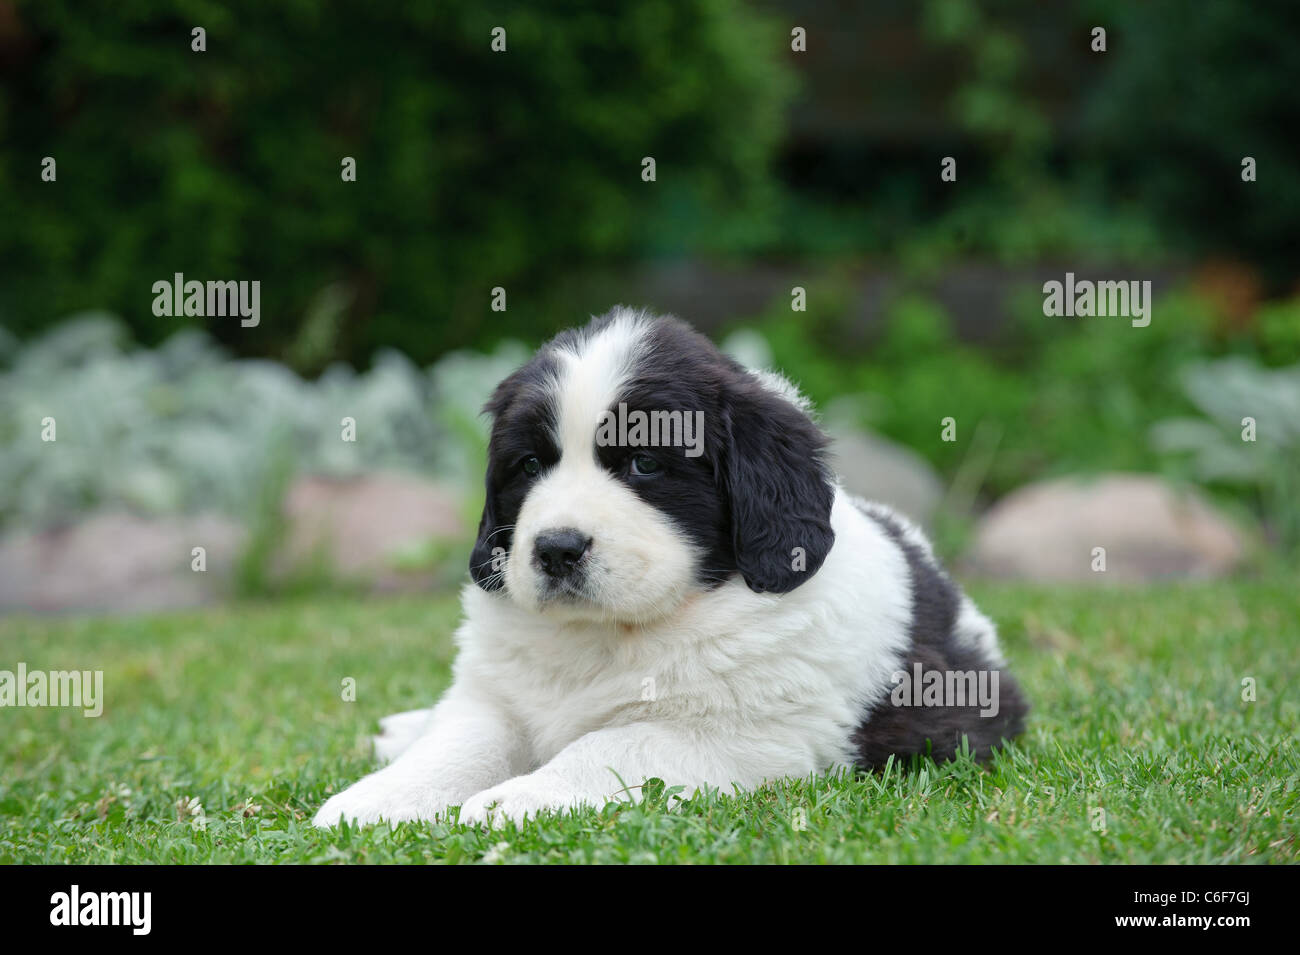 Puppy Newfoundland Landseer High Resolution Stock Photography and Images -  Alamy